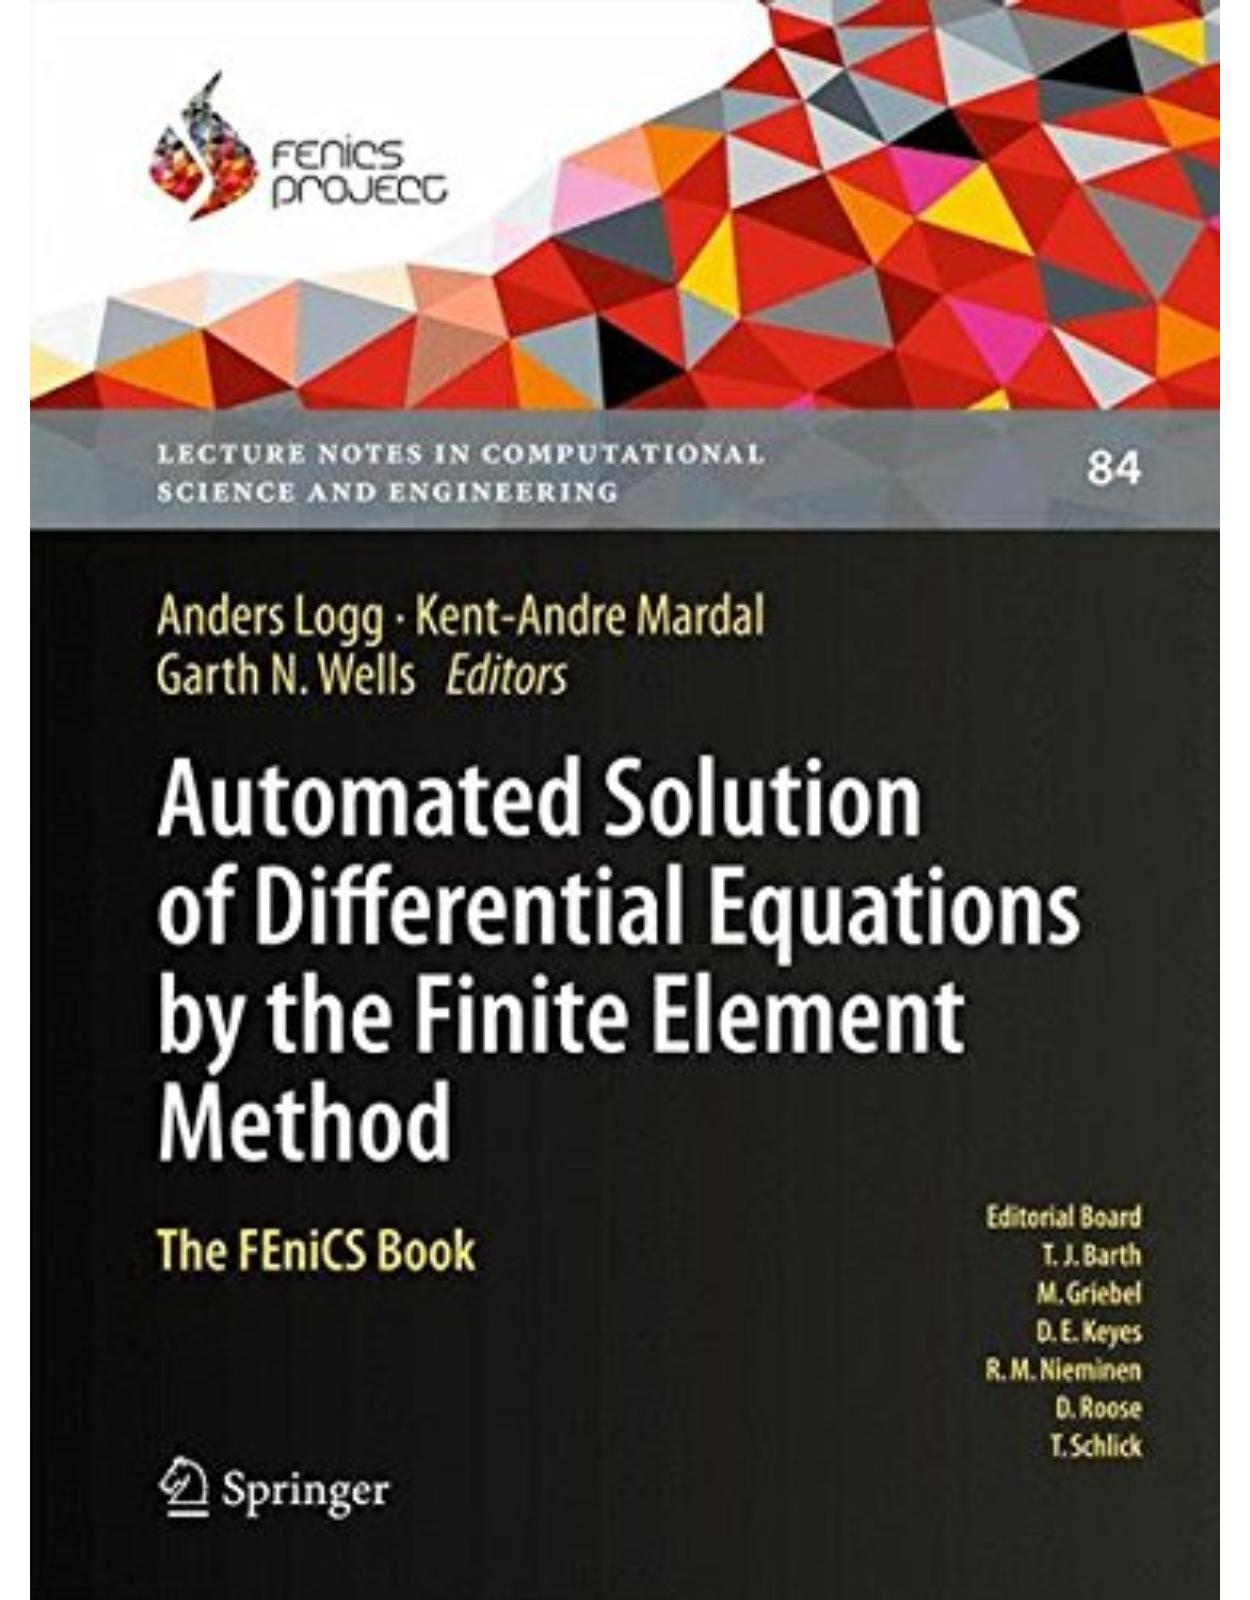 Automated Solution of Differential Equations by the Finite Element Method